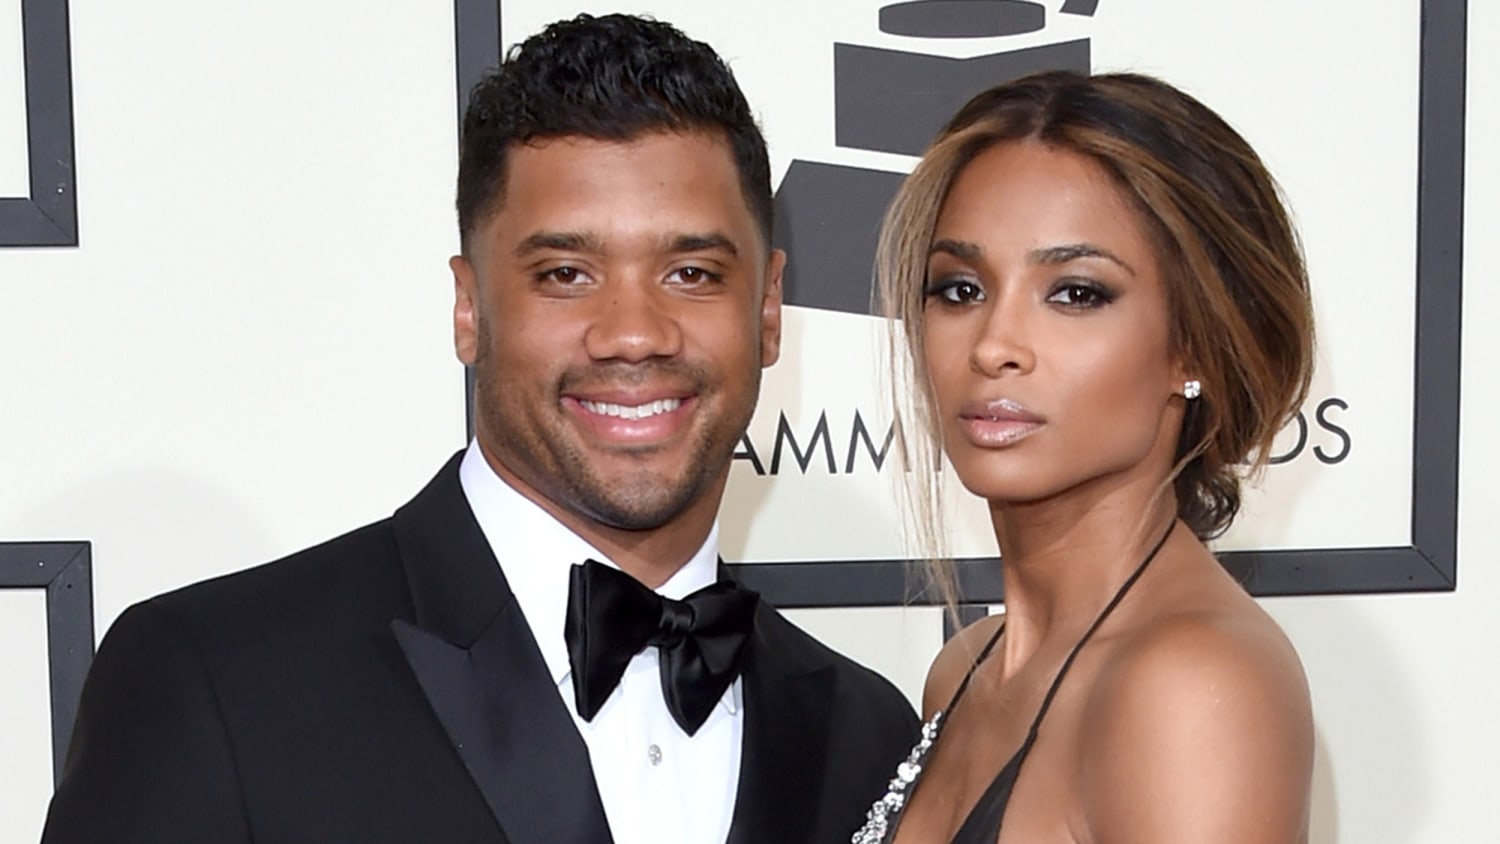 Ciara and Russell Wilson announce engagement in sweet video: 'She said yes!' - TODAY.com2500 x 1407